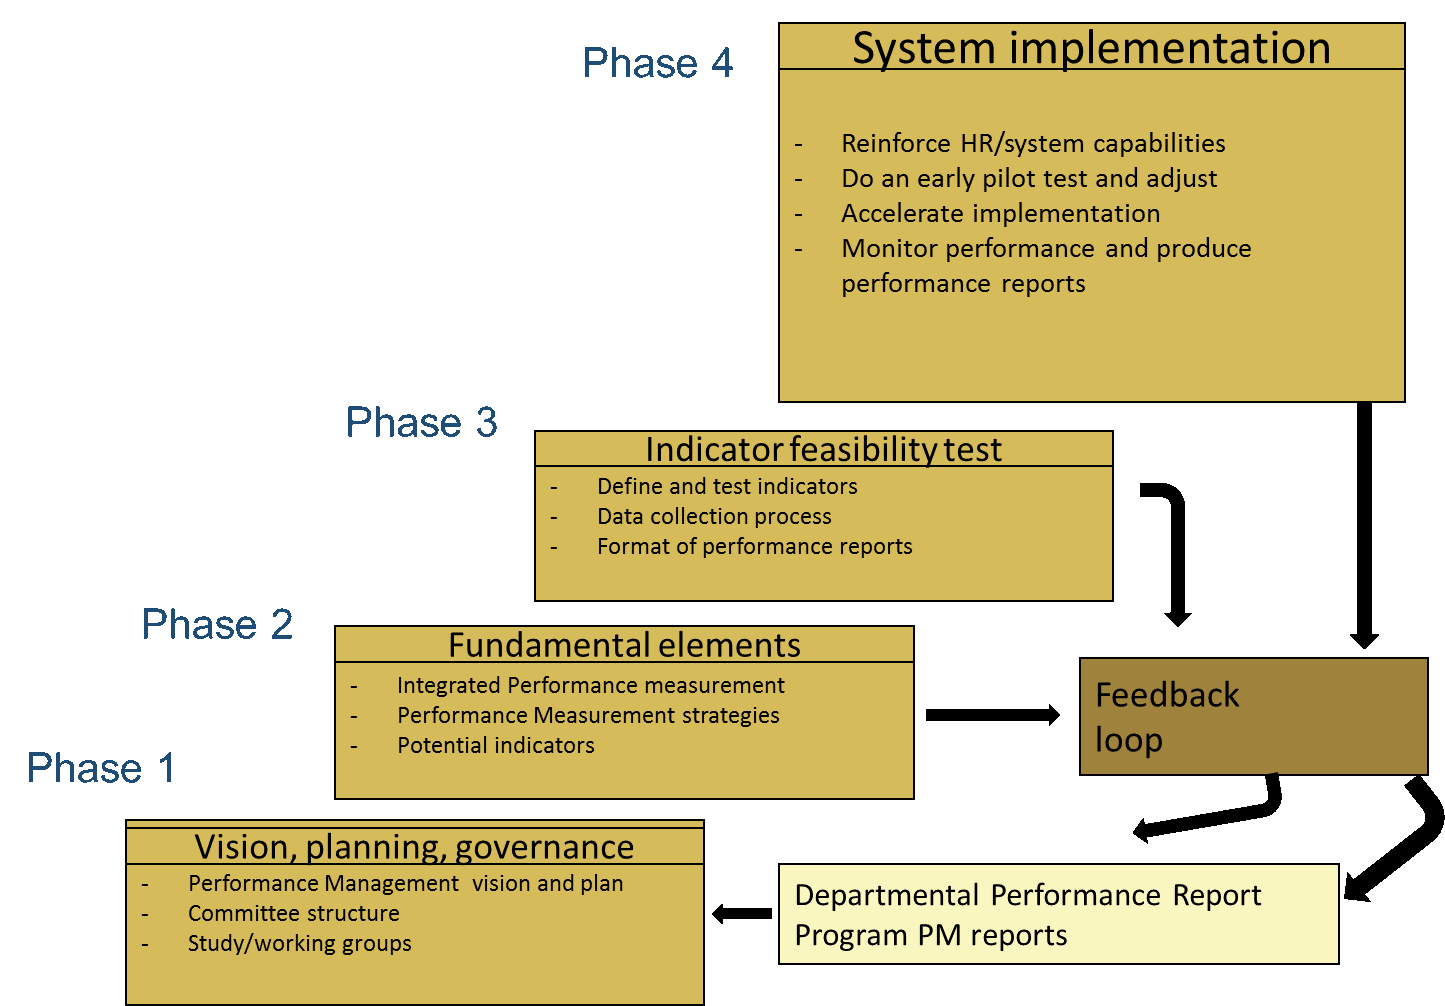  Four phases of the Statistics Canada Performance System